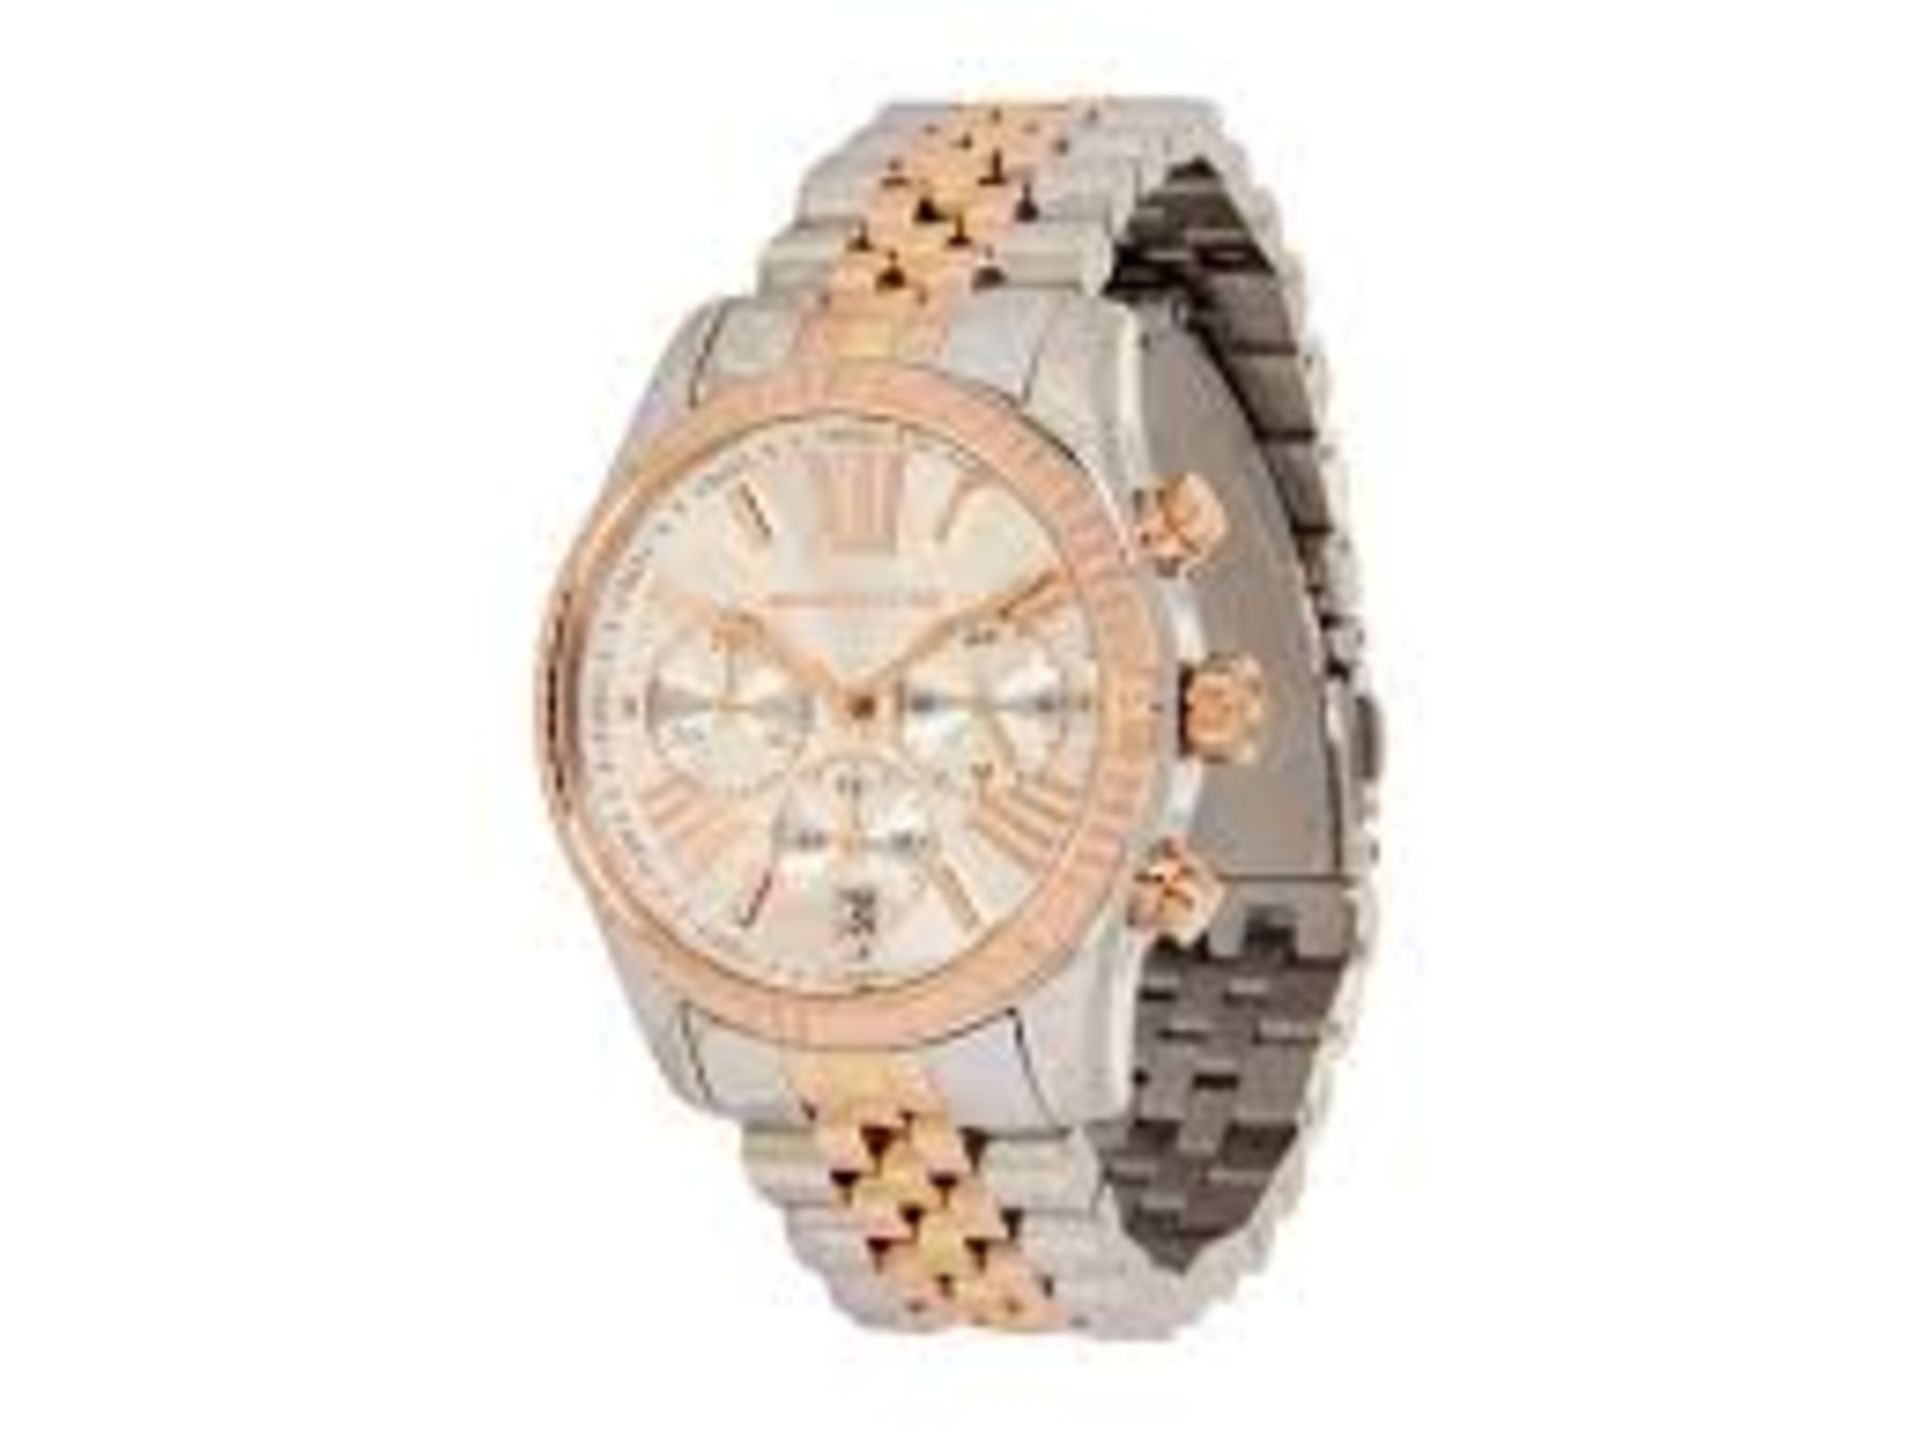 Ladies Michael Kors watch from the lexington collection, model number Mk5735.  Stainless steel/tri- - Image 2 of 2